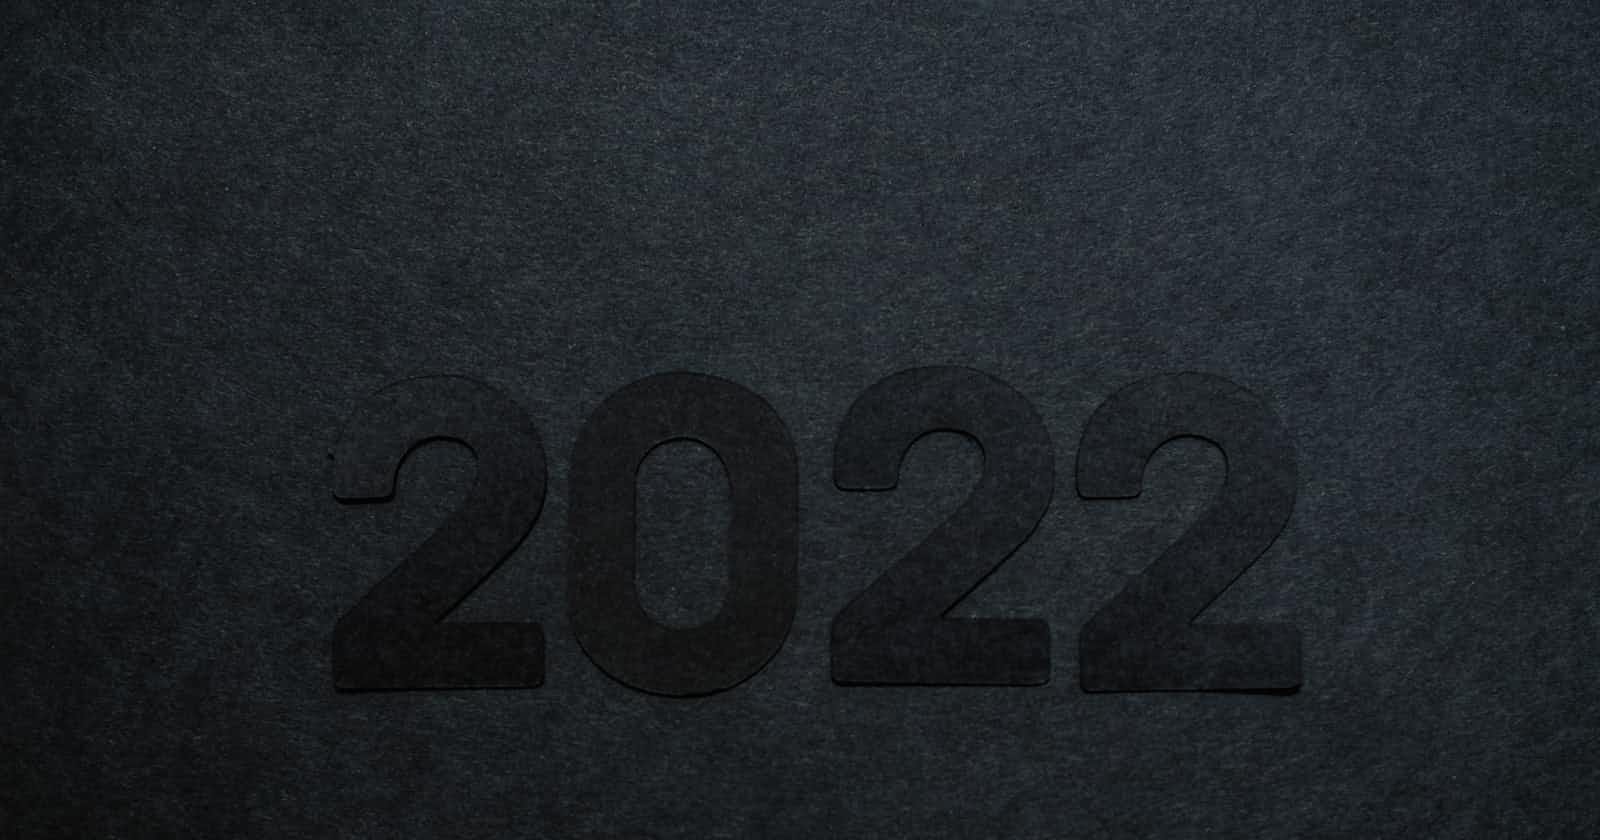 2022 Reviewed: A solid year with dangerous content.